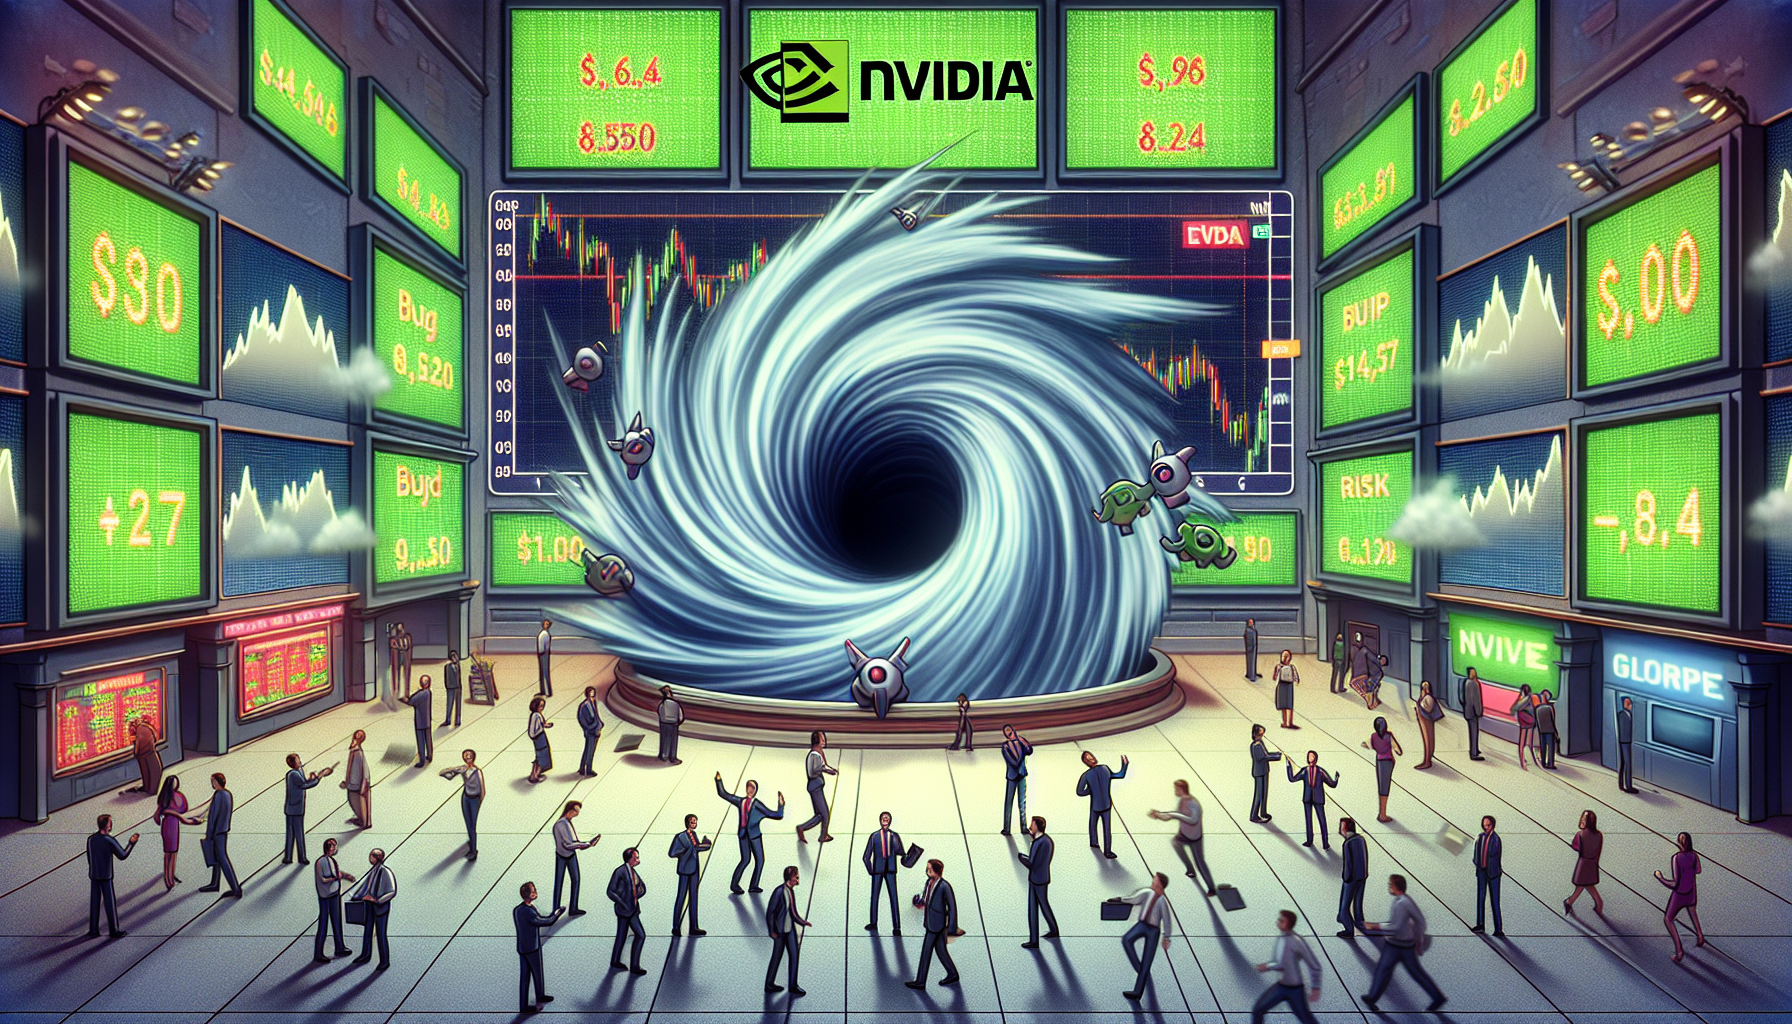 Retail traders seize opportunity in Nvidia stock dip: a deep dive into market impact